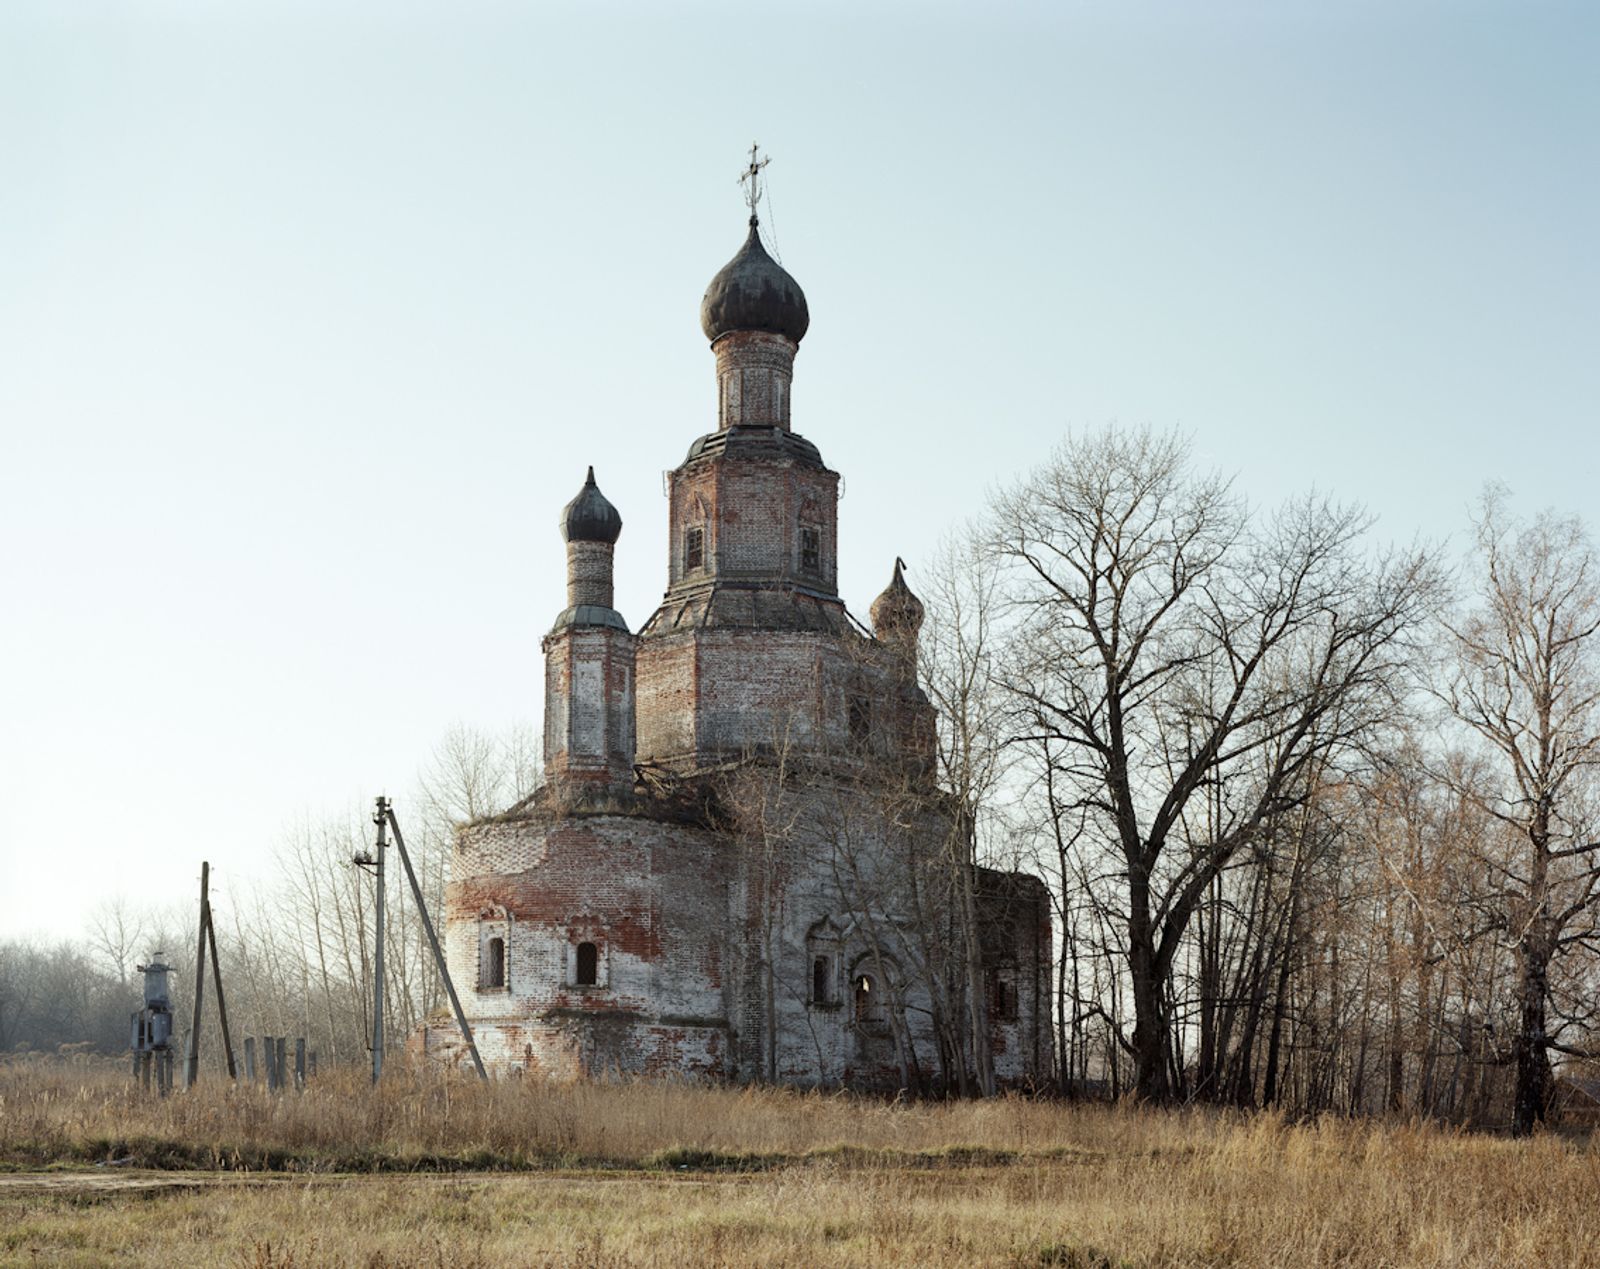 © Petr Antonov - Image from the RUINS photography project